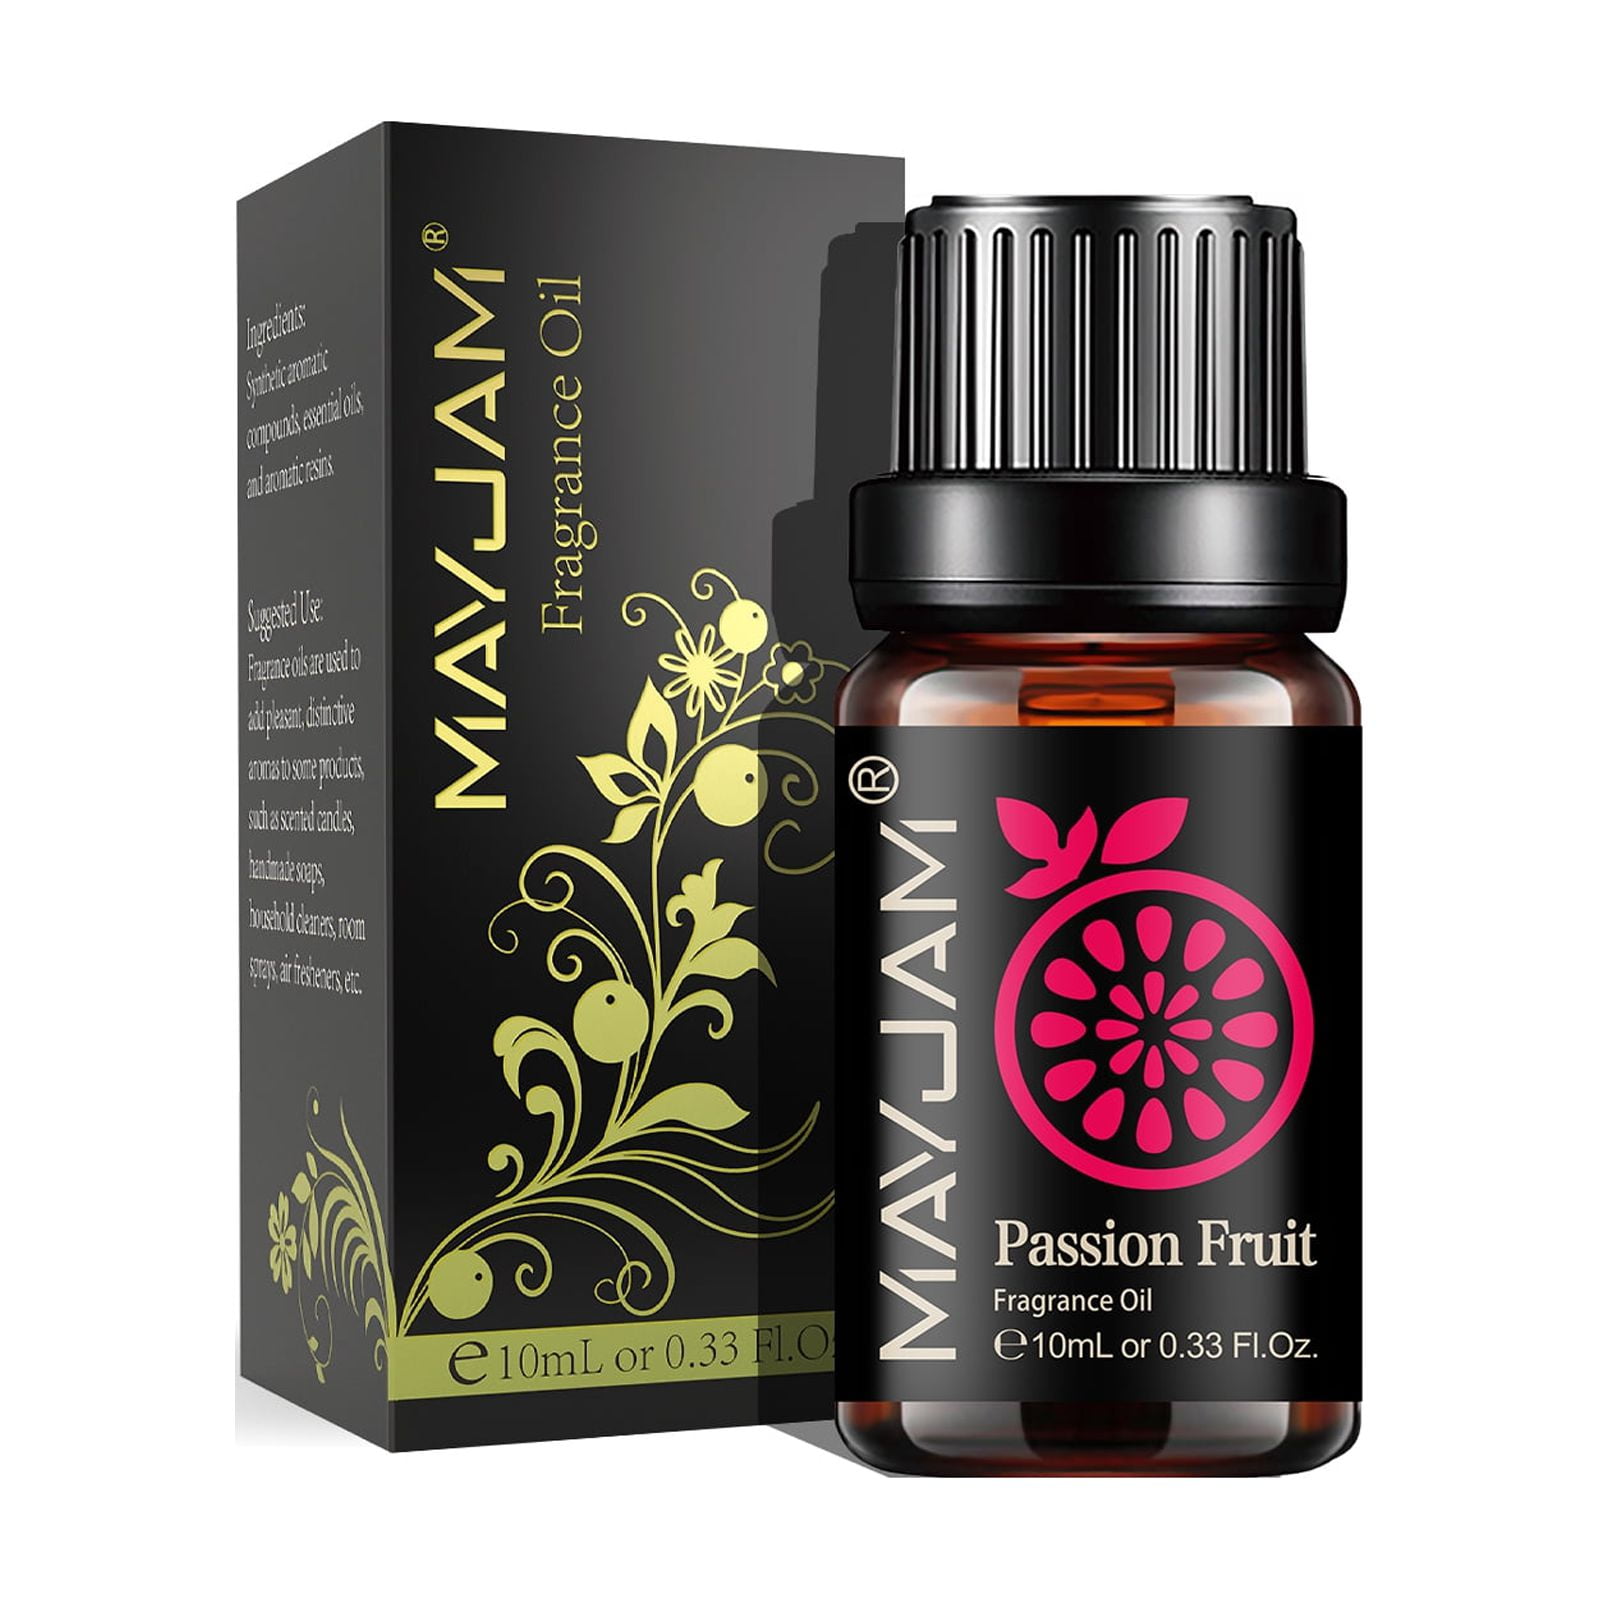 Buy 8 Get 2 Free 10ml Passion Fruit Fragrance Oil Diffuser